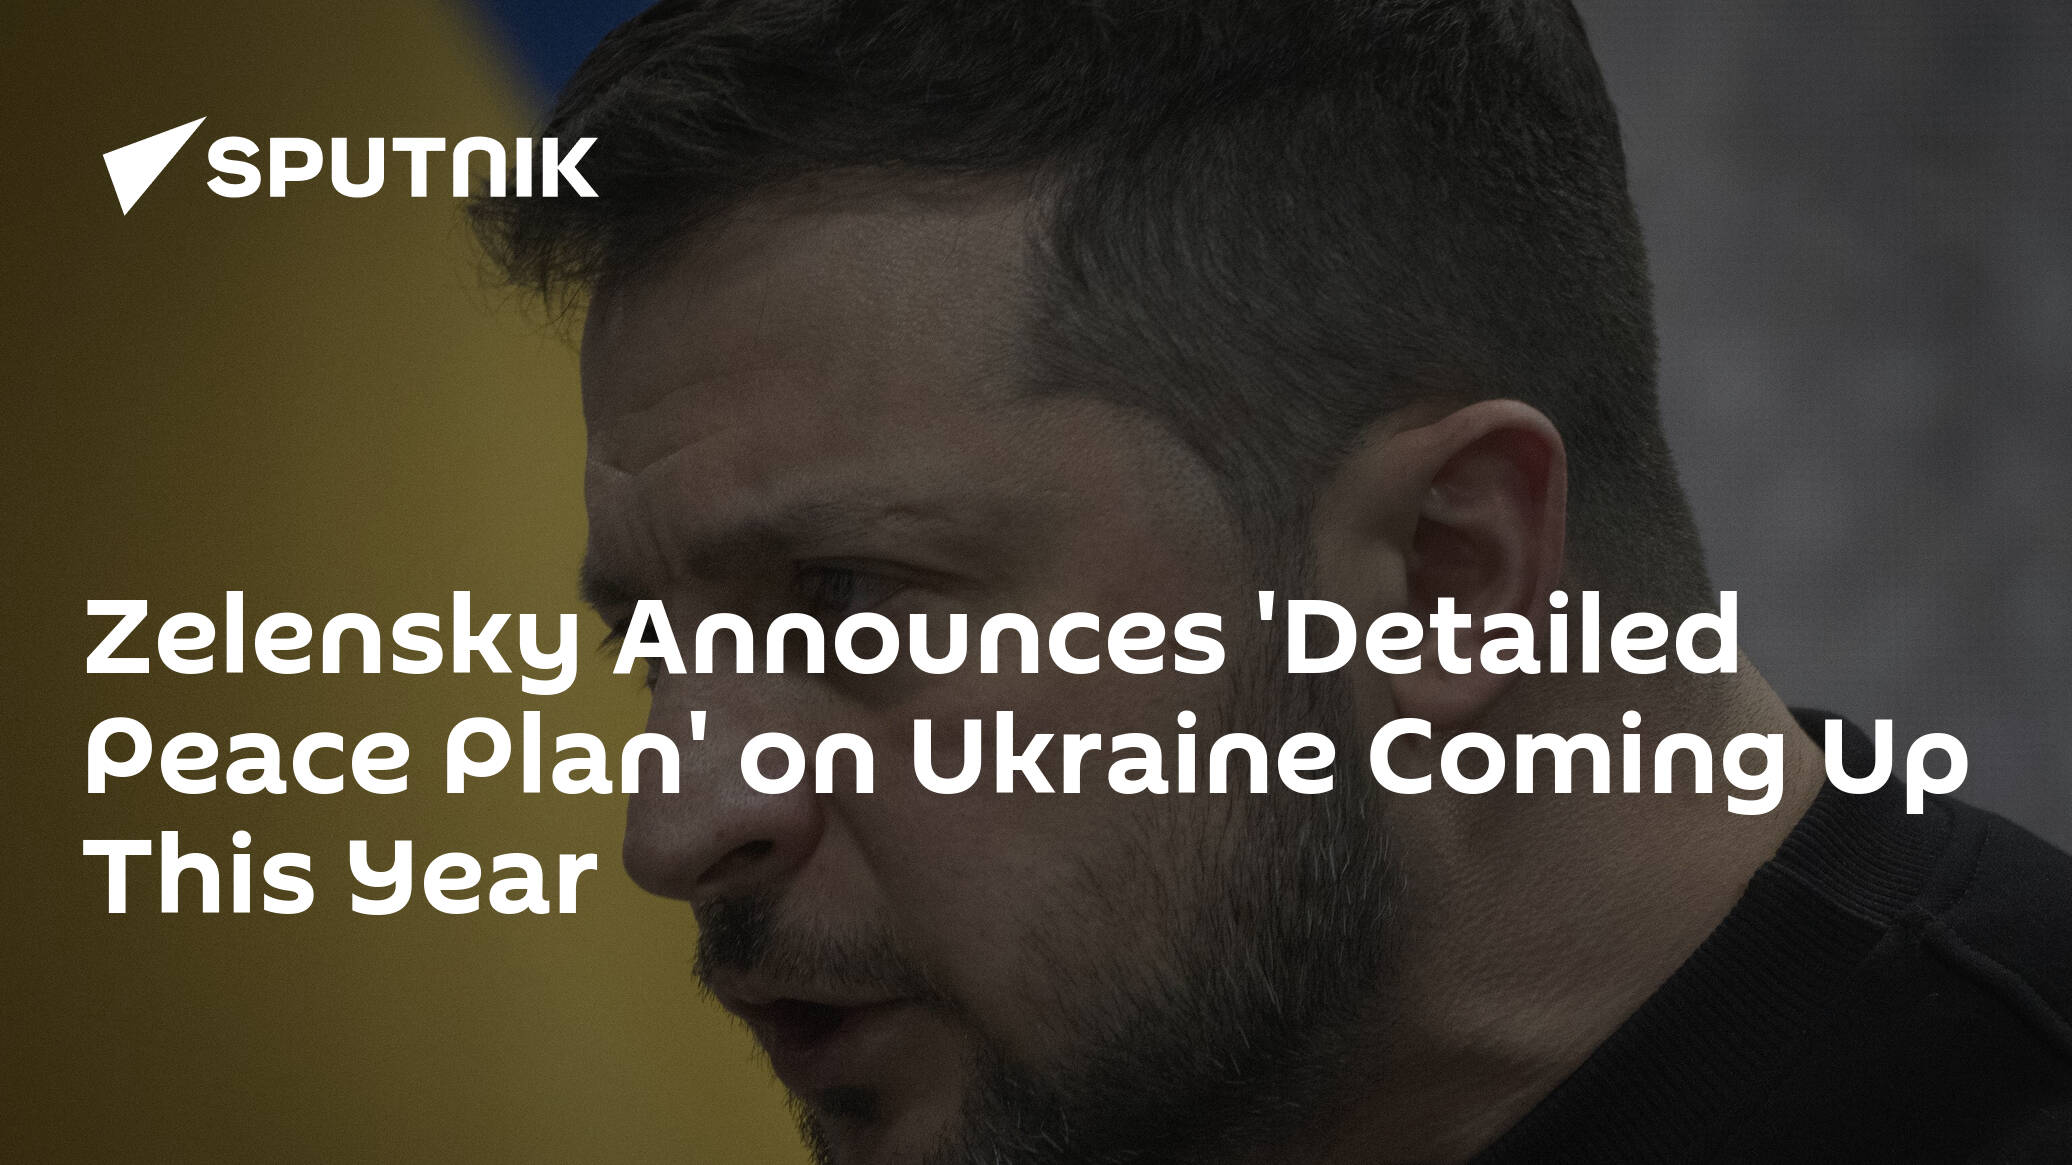 Zelensky Announces 'Detailed Peace Plan' on Ukraine Coming Up This Year